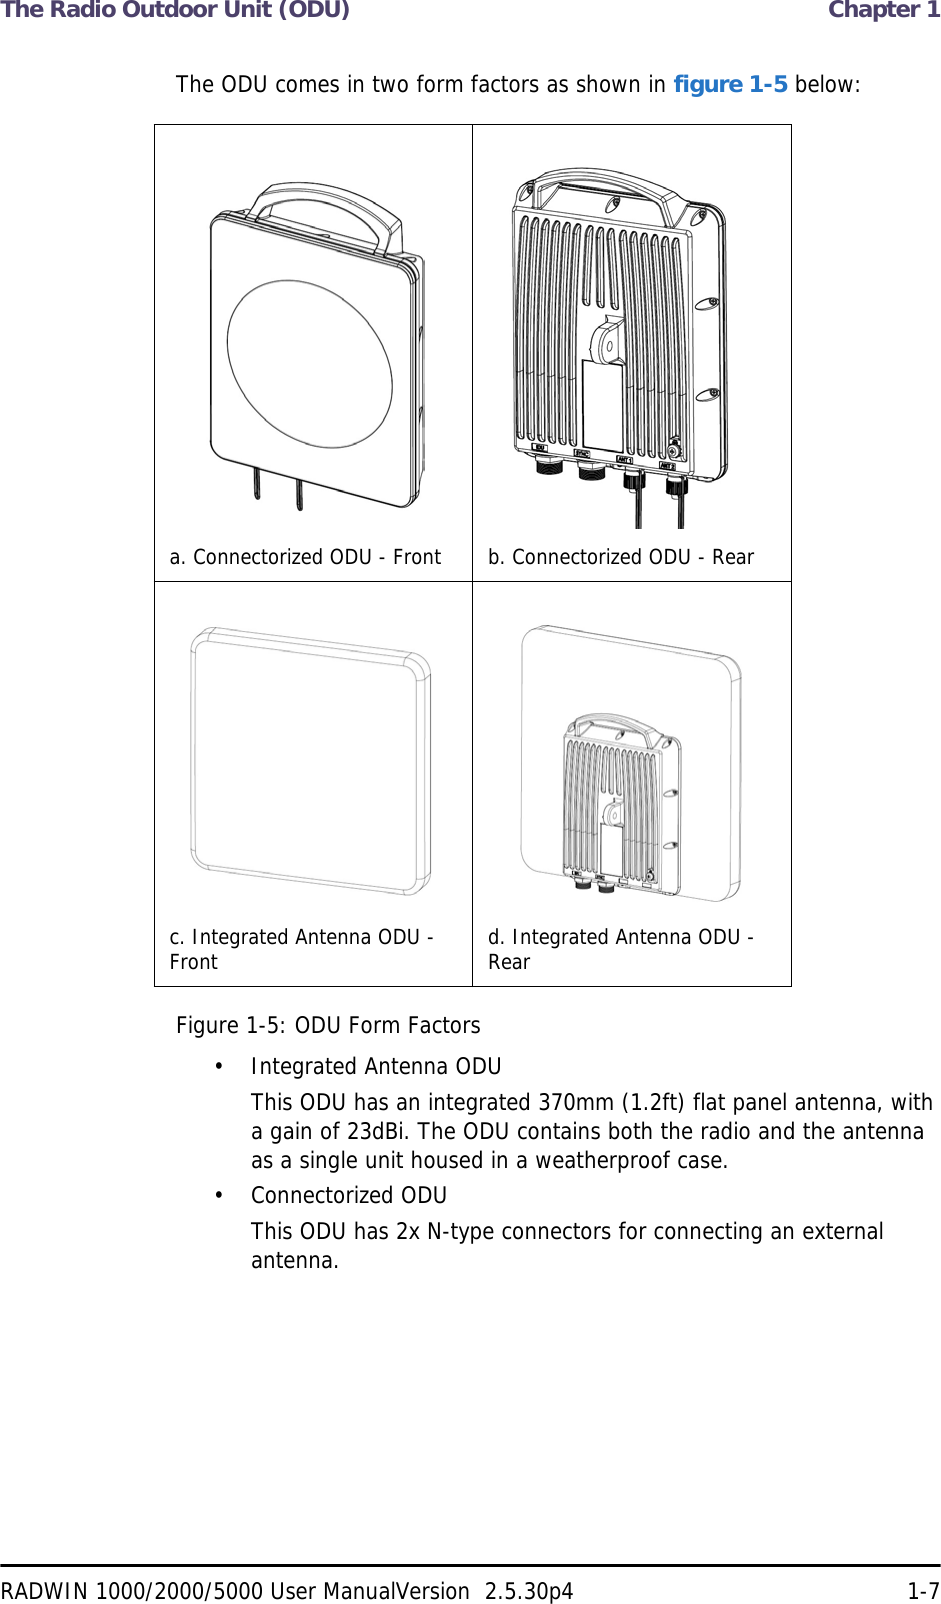 The Radio Outdoor Unit (ODU)  Chapter 1RADWIN 1000/2000/5000 User ManualVersion  2.5.30p4 1-7The ODU comes in two form factors as shown in figure 1-5 below:Figure 1-5: ODU Form Factors• Integrated Antenna ODUThis ODU has an integrated 370mm (1.2ft) flat panel antenna, with a gain of 23dBi. The ODU contains both the radio and the antenna as a single unit housed in a weatherproof case.• Connectorized ODUThis ODU has 2x N-type connectors for connecting an external antenna.a. Connectorized ODU - Front b. Connectorized ODU - Rearc. Integrated Antenna ODU - Front d. Integrated Antenna ODU - Rear